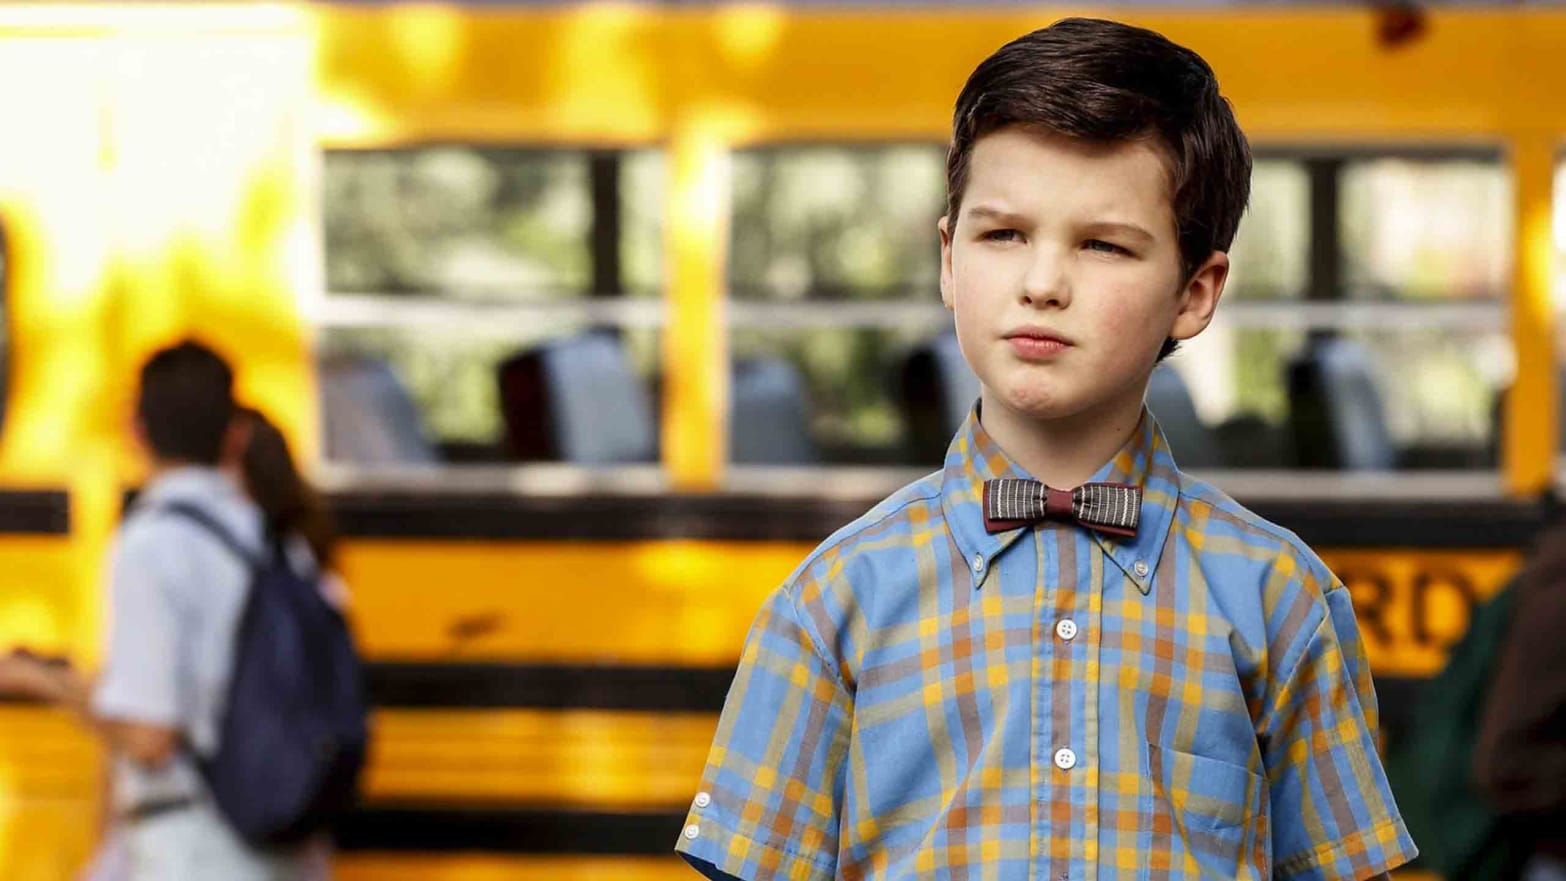 The End of an Era Young Sheldon and Its Grand Goodbye 